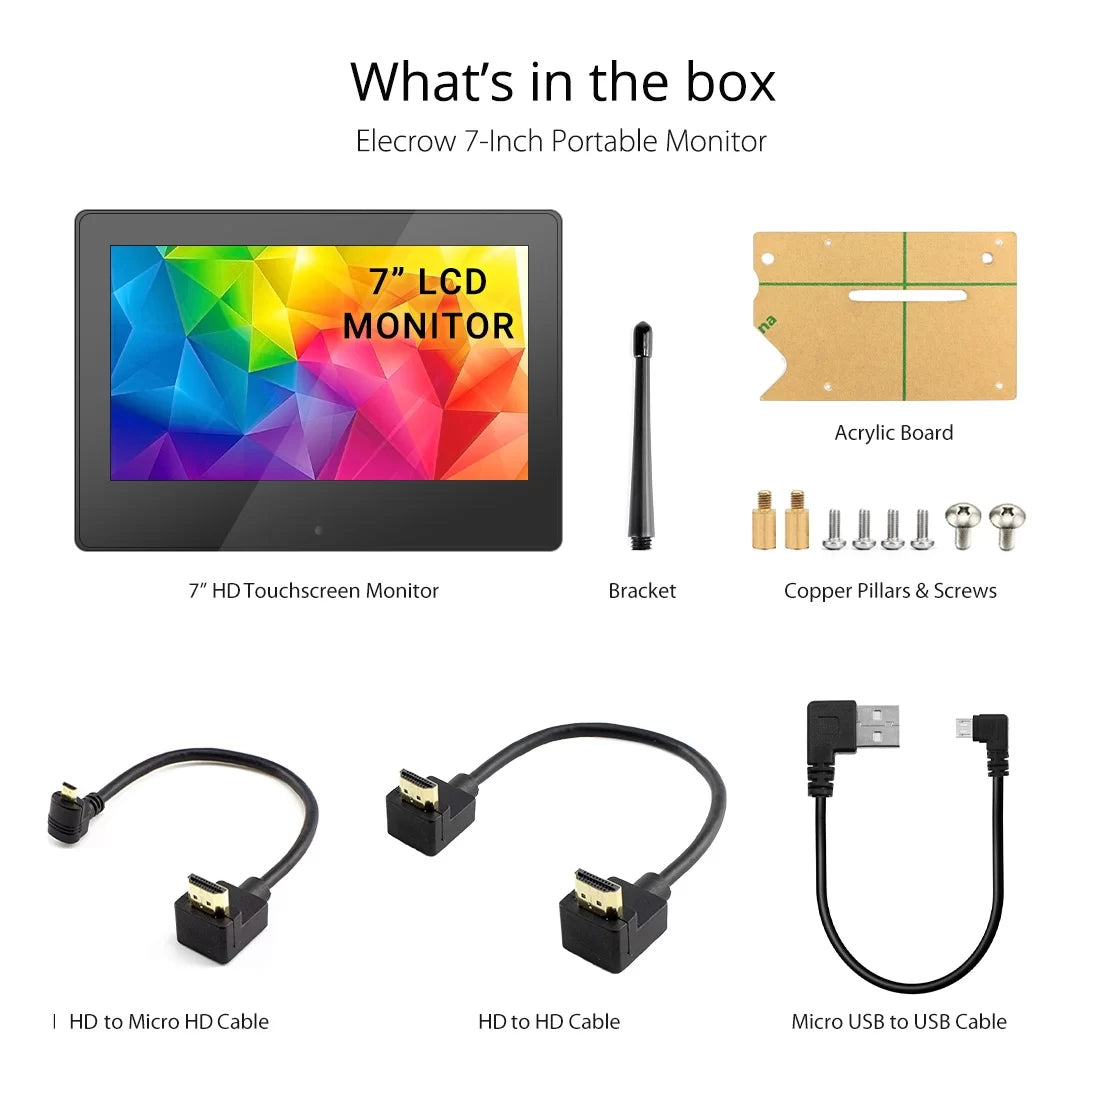 RC070P 7 Inch Raspberry Pi Monitor Touchscreen Capacitive IPS USB Powered Display